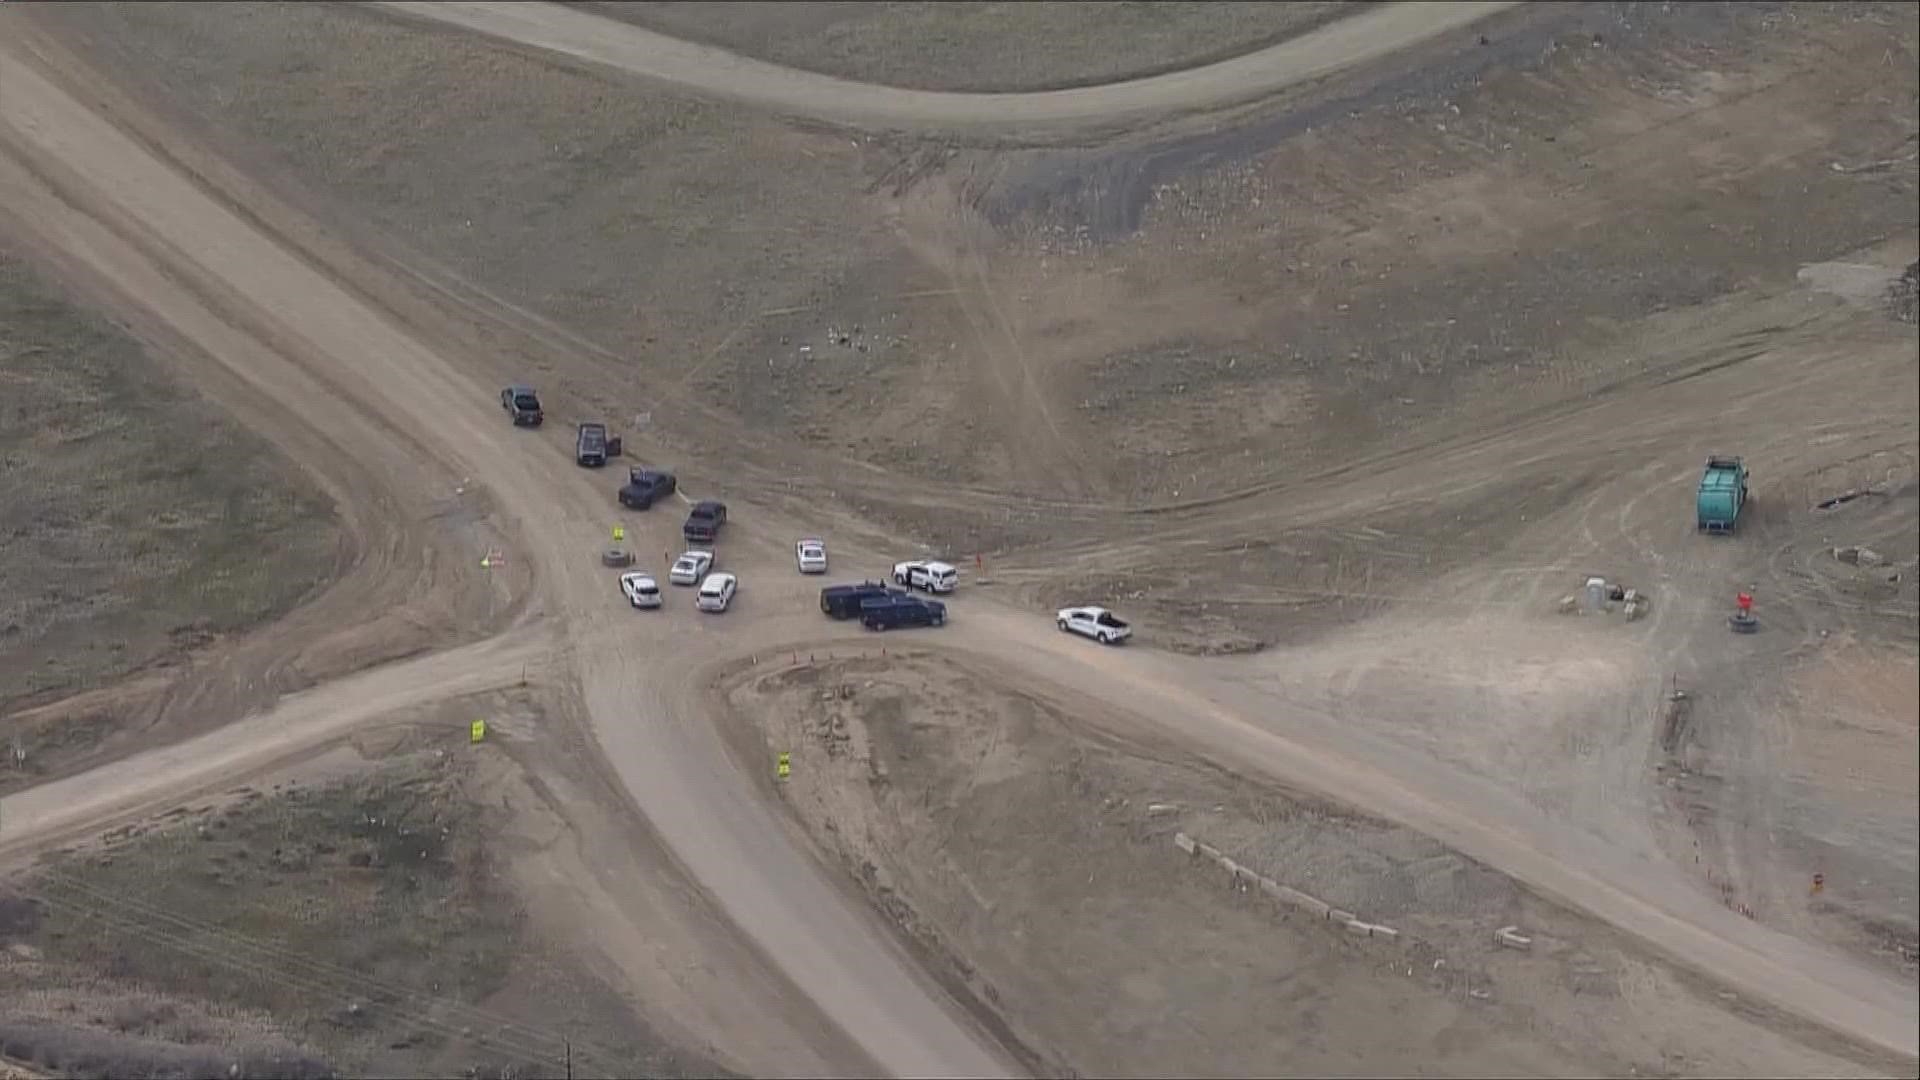 The suspect was shot at the Larimer County landfill, according to the sheriff's office. No deputies were injured.